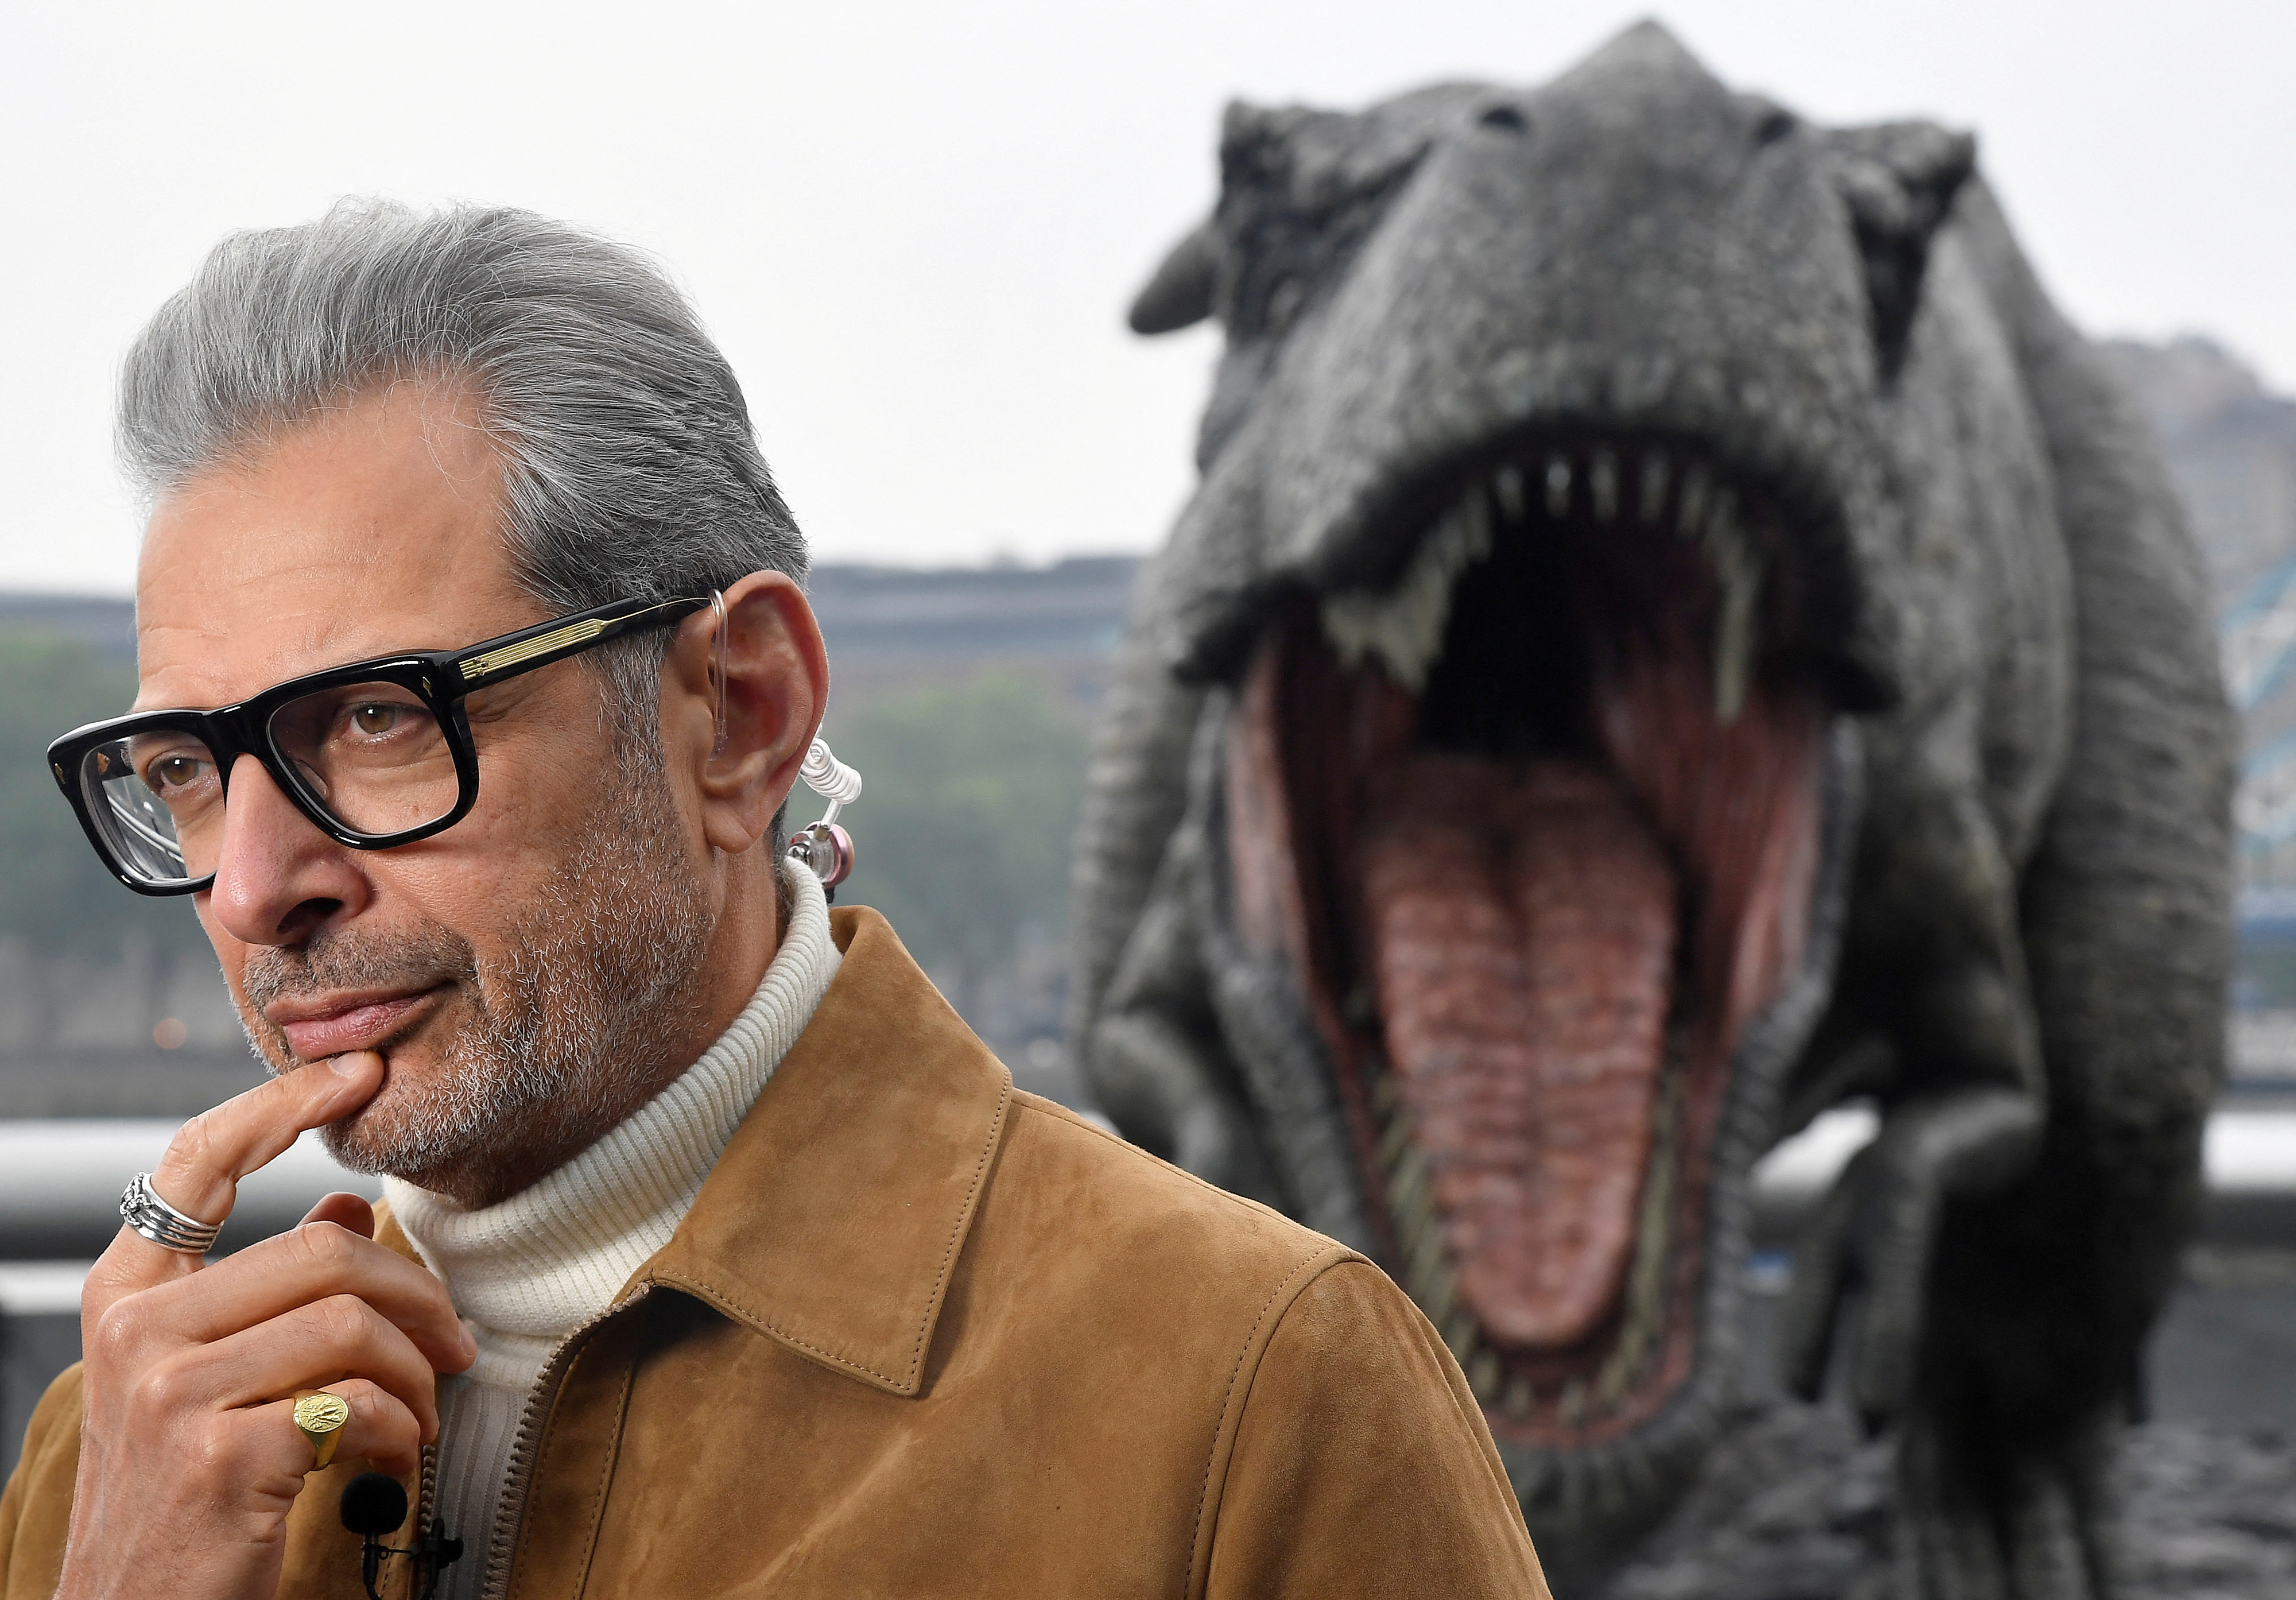 Cast member Goldblum attends photocall to promote the forthcoming film 'Jurassic World: Fallen Kingdom' in London, Britain